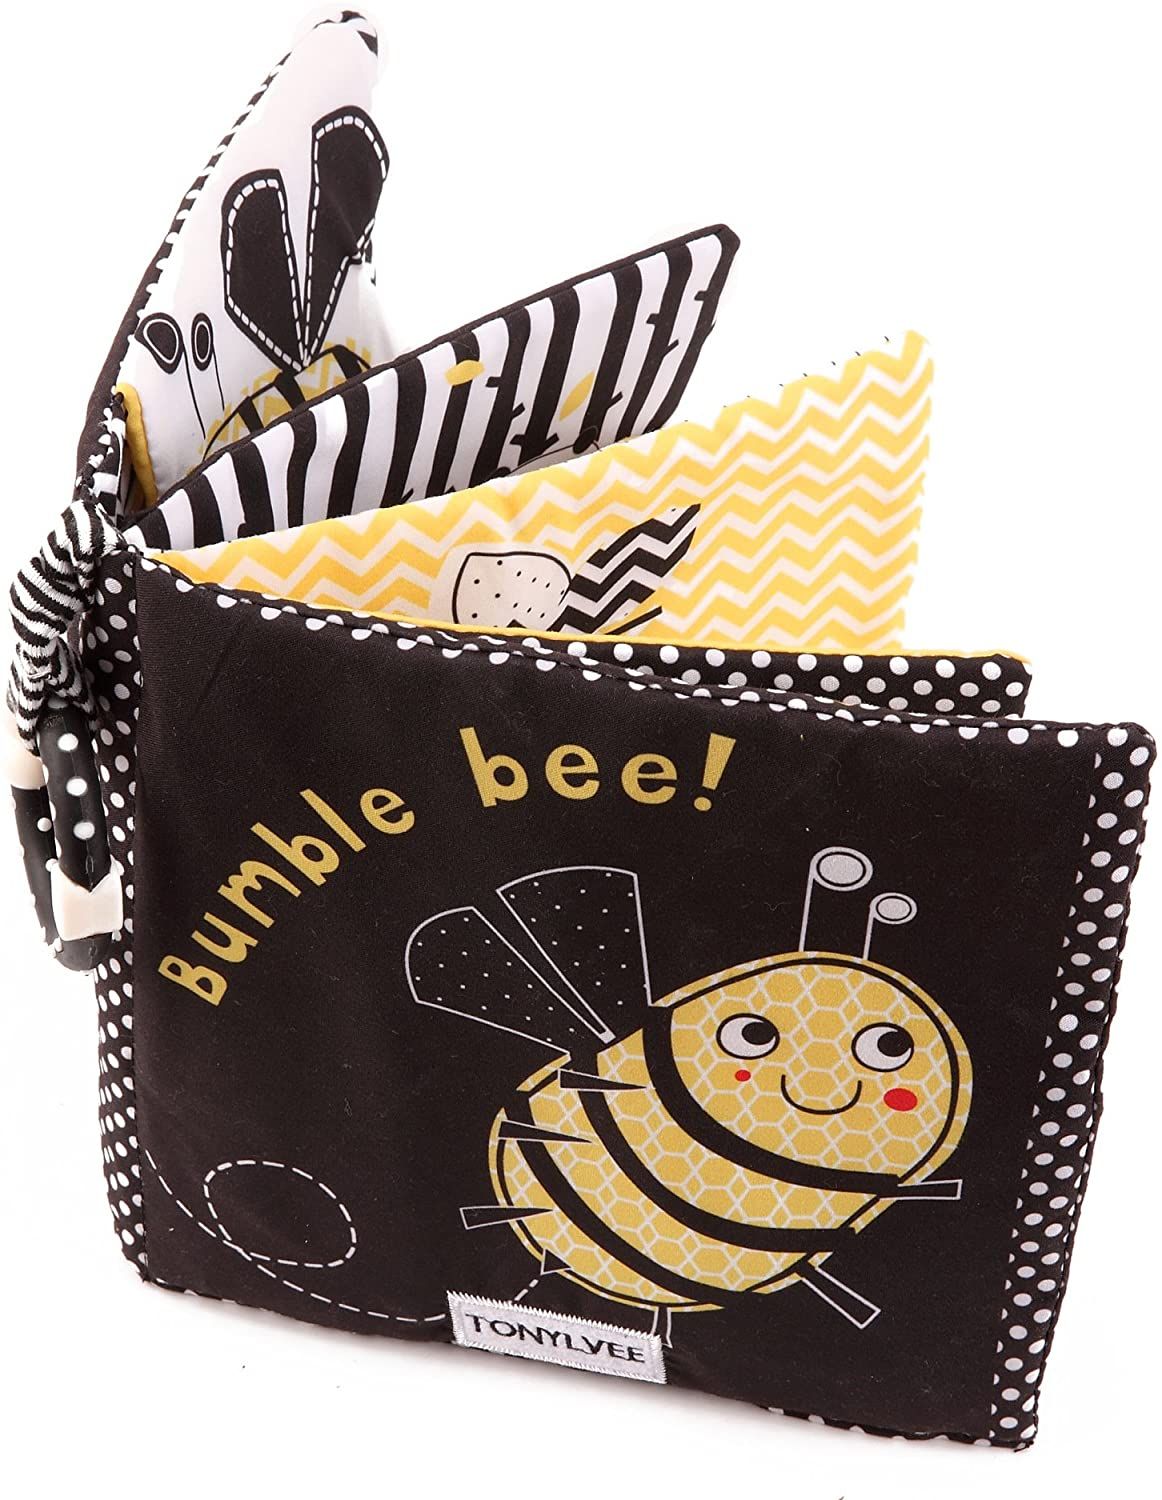 Bumble Bee! cloth book cover